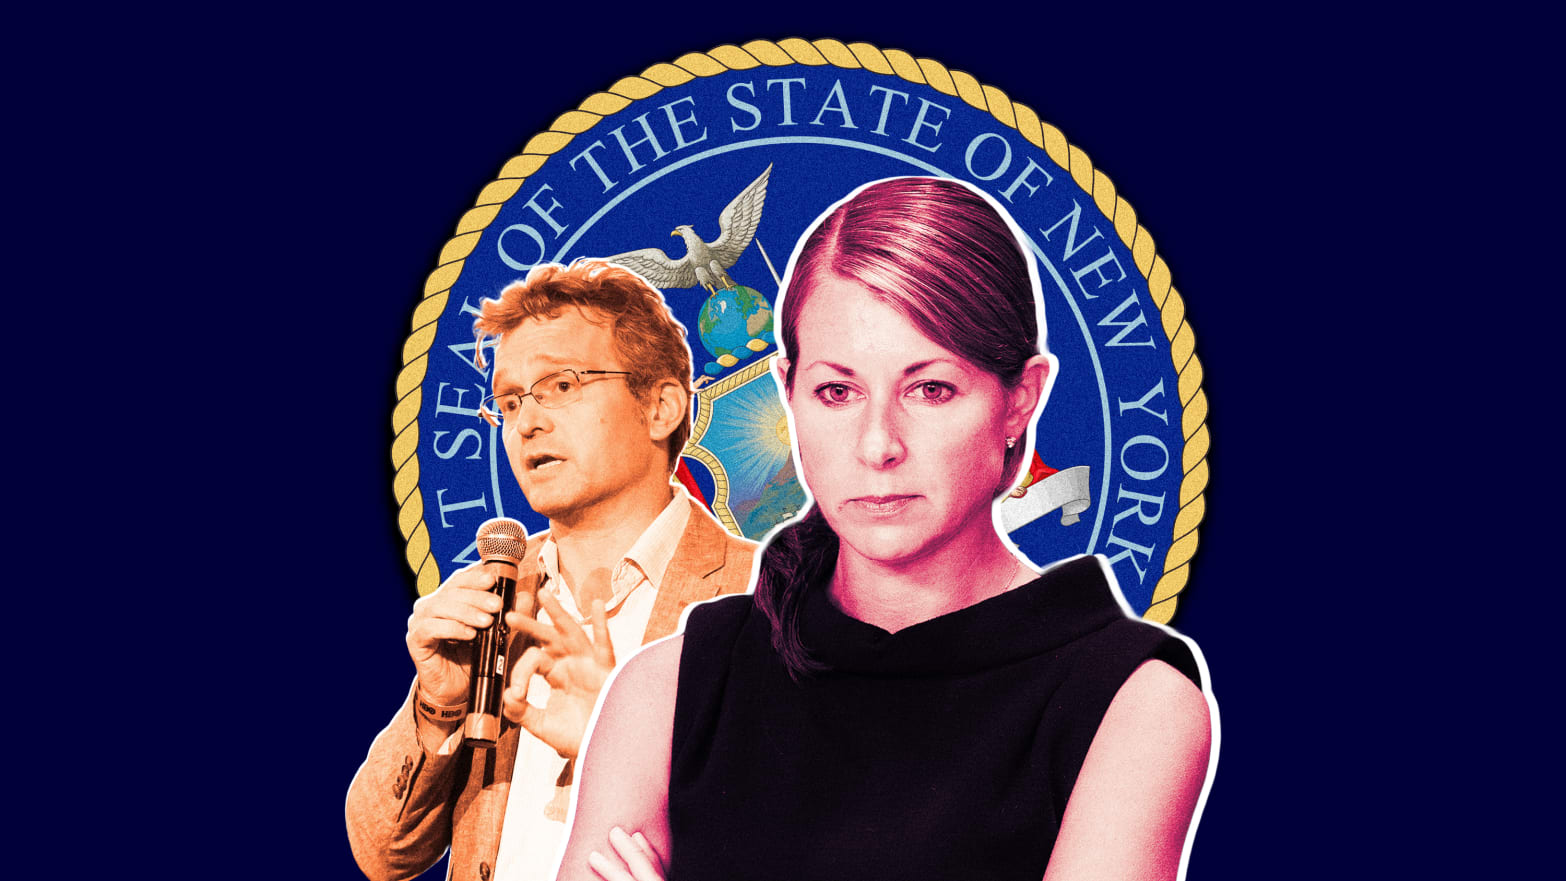 A photo illustration of Jesse McKinley and Melissa DeRosa of the state seal of New York.